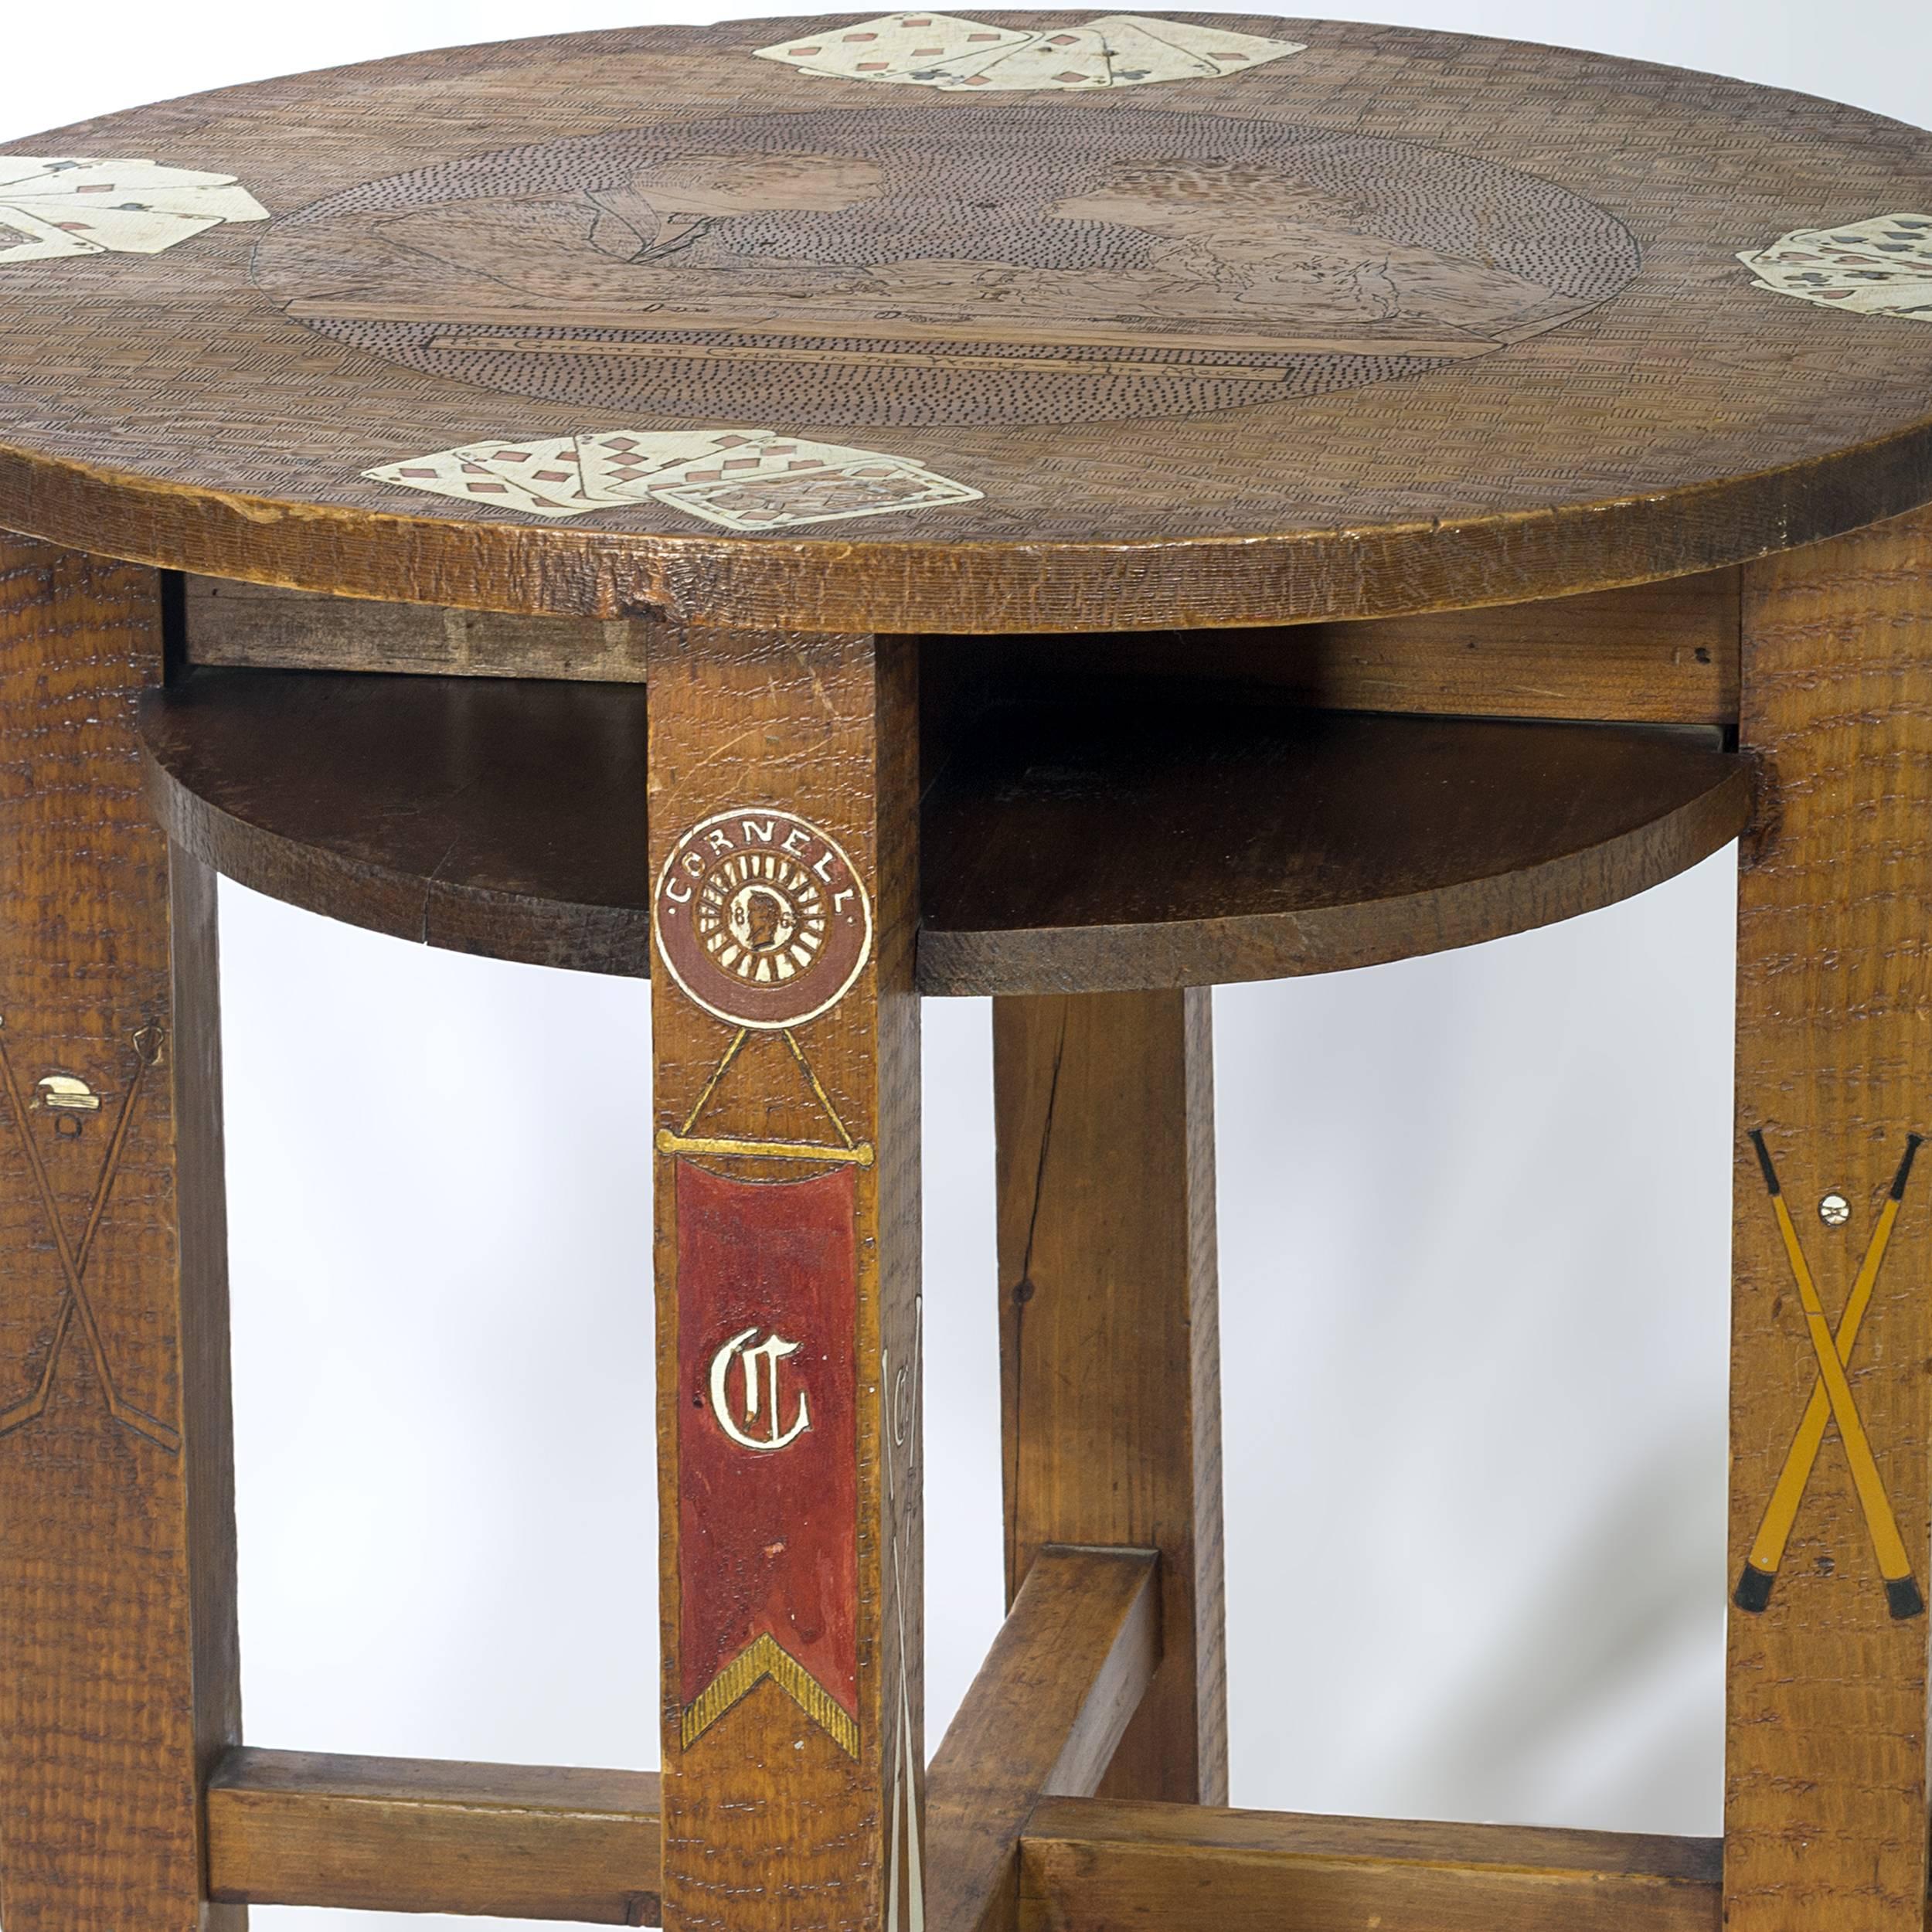 American Arts and Crafts Ivy League University Card Table